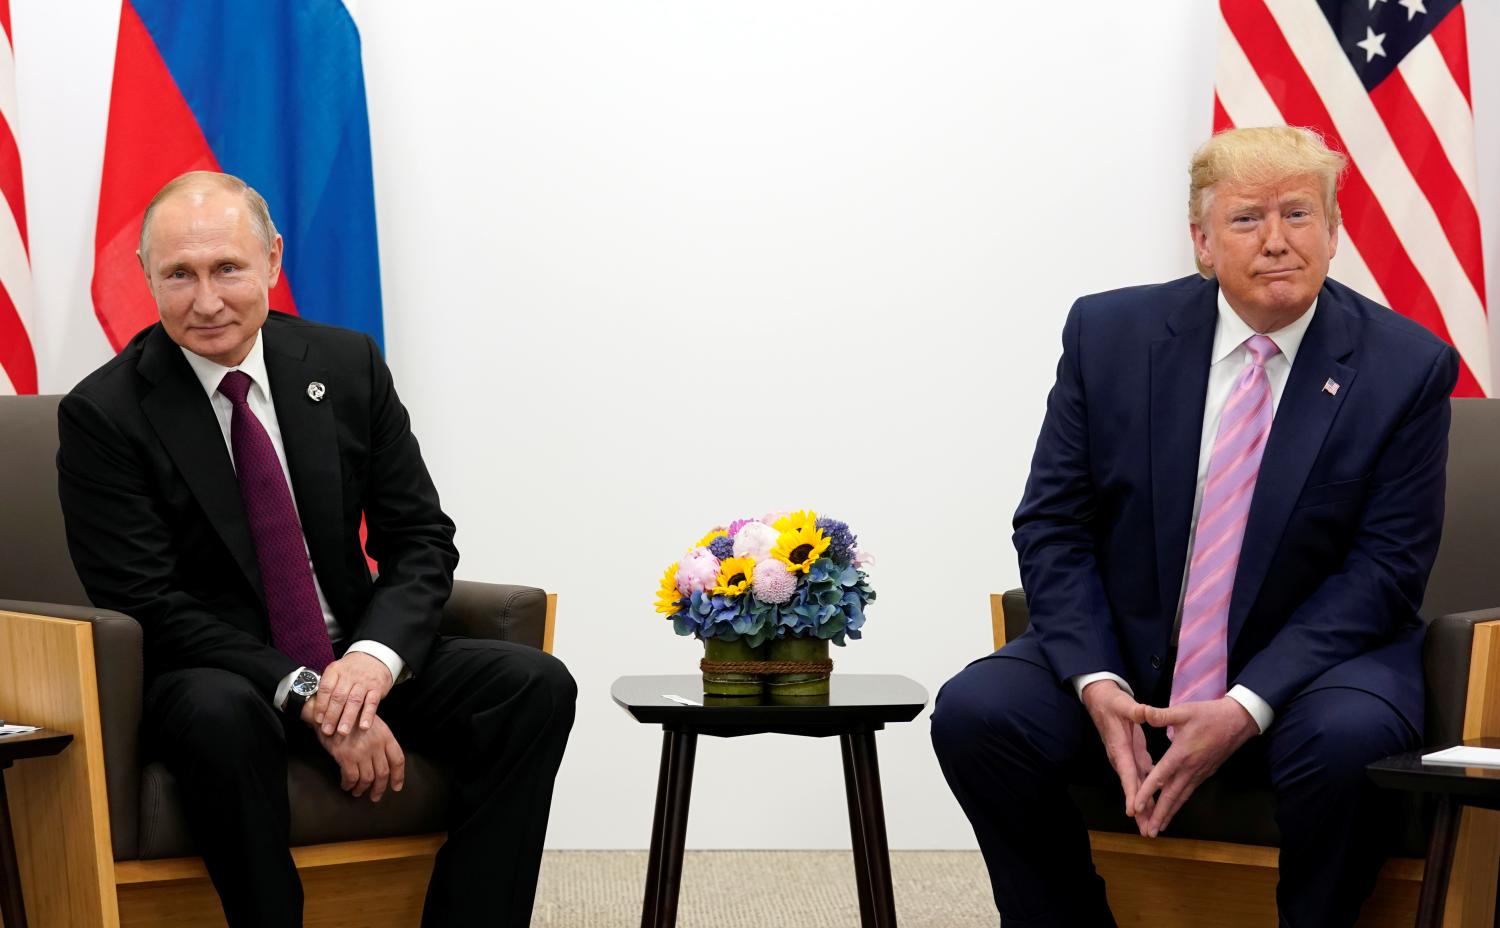 U.S. President Donald Trump meets with Russian President Vladimir Putin at the G20 Summit in Osaka, Japan June 28, 2019.  REUTERS/Kevin Lamarque - RC1455EA2DC0